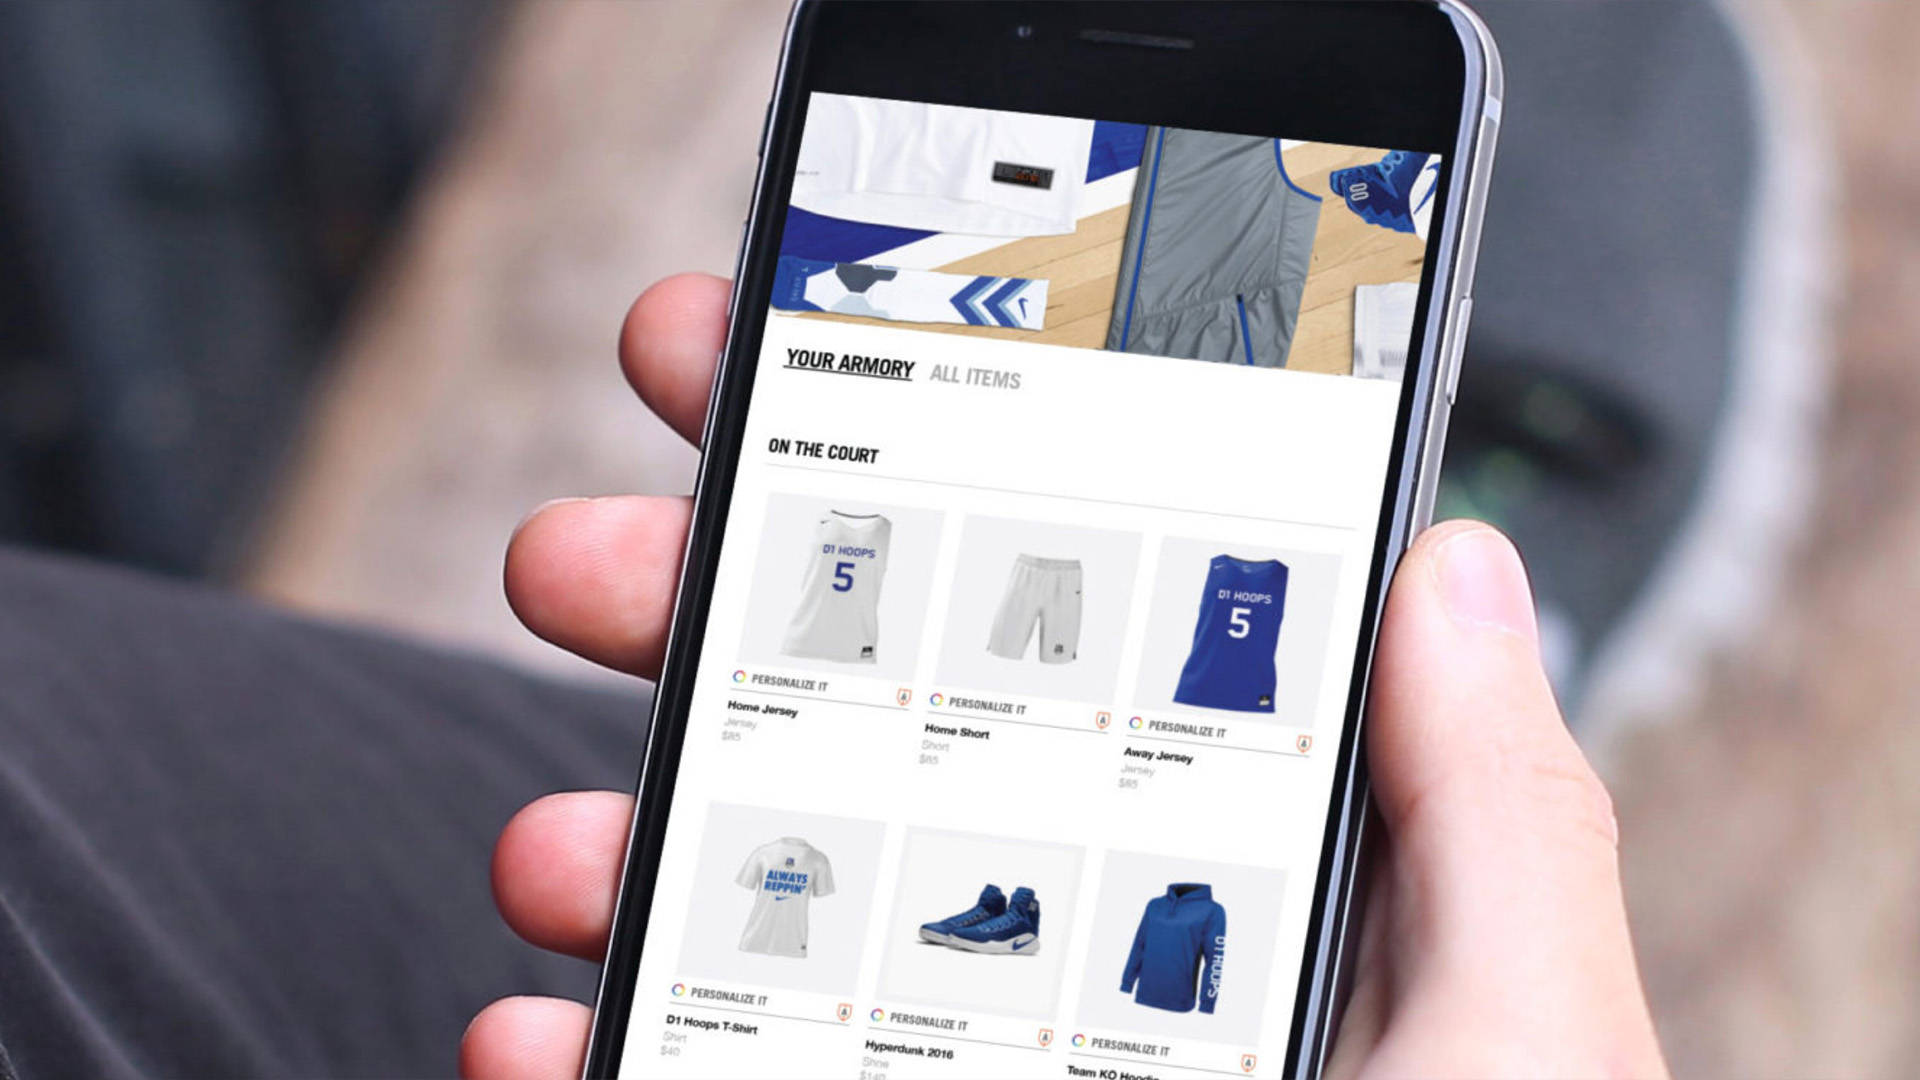 Handheld smartphone showing a Nike e-commerce app.